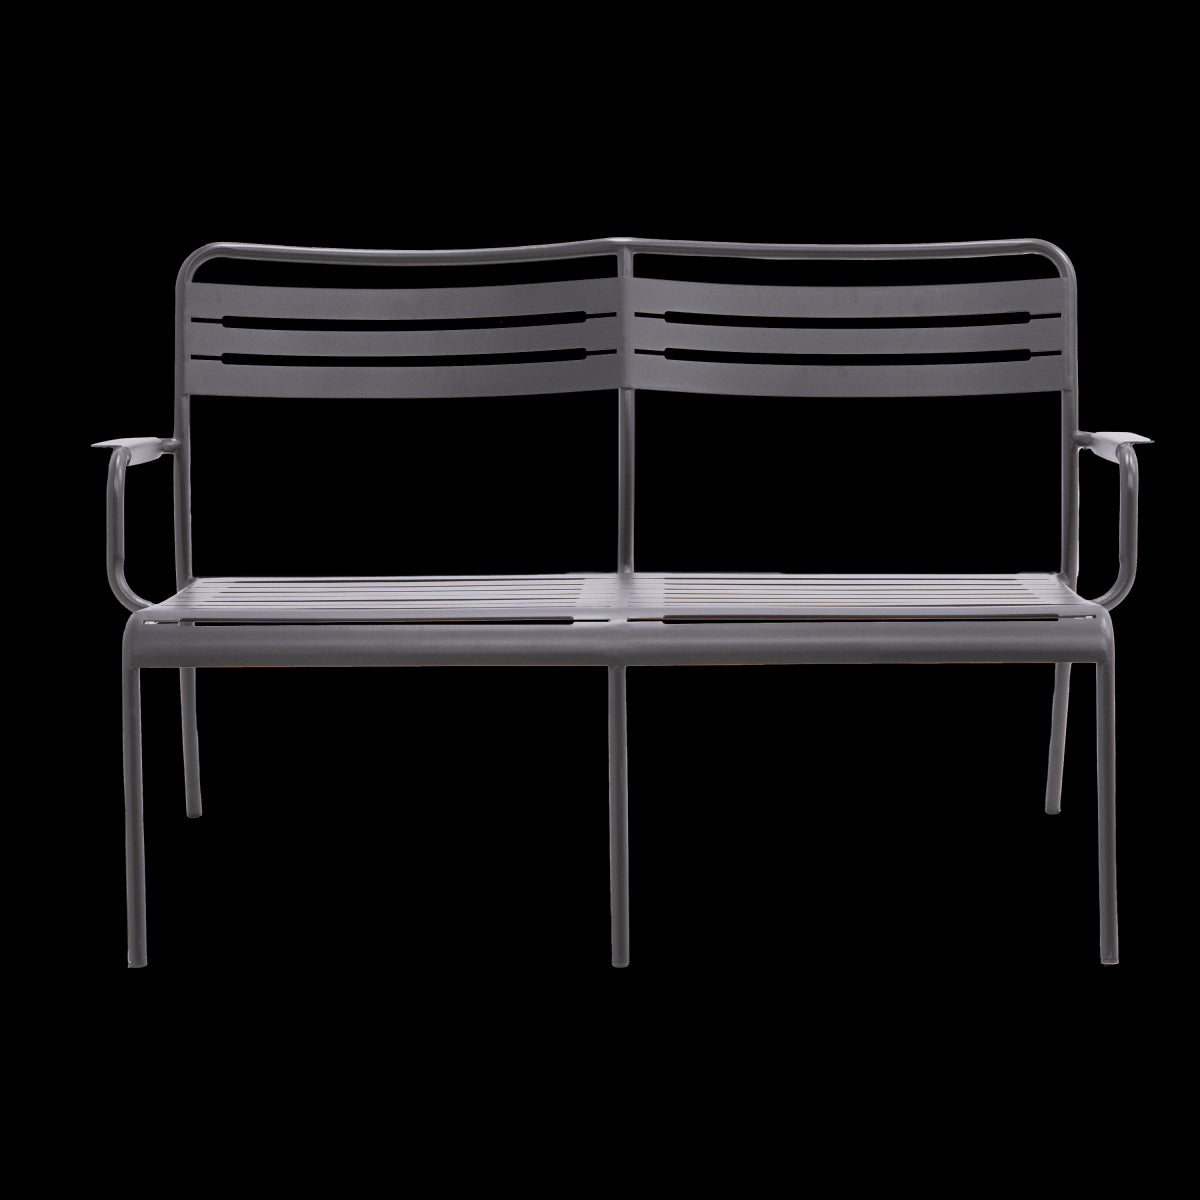 2-SEATER SOFA CAFE II STEEL 120.5X71.5 CM WITHOUT CUSHIONS ANTHRACITE